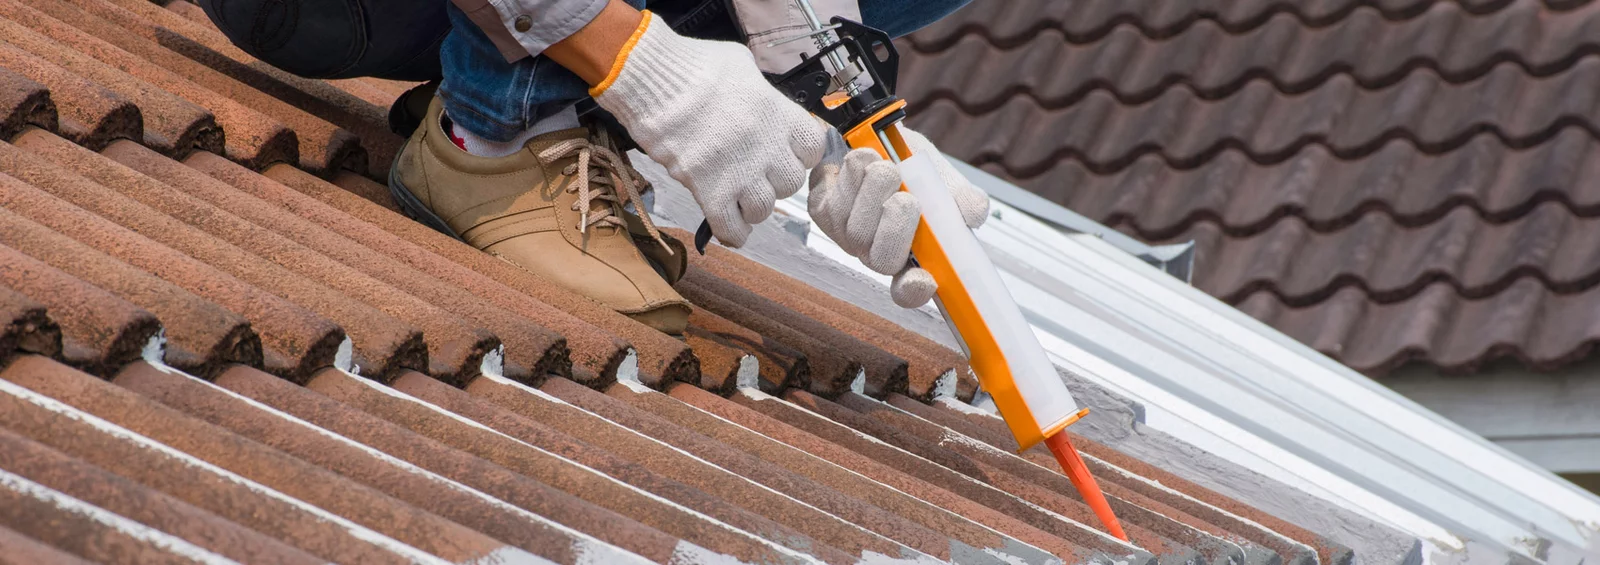 Why Use Twickenham Roofers: Expertise, Reliability, and Local Advantage